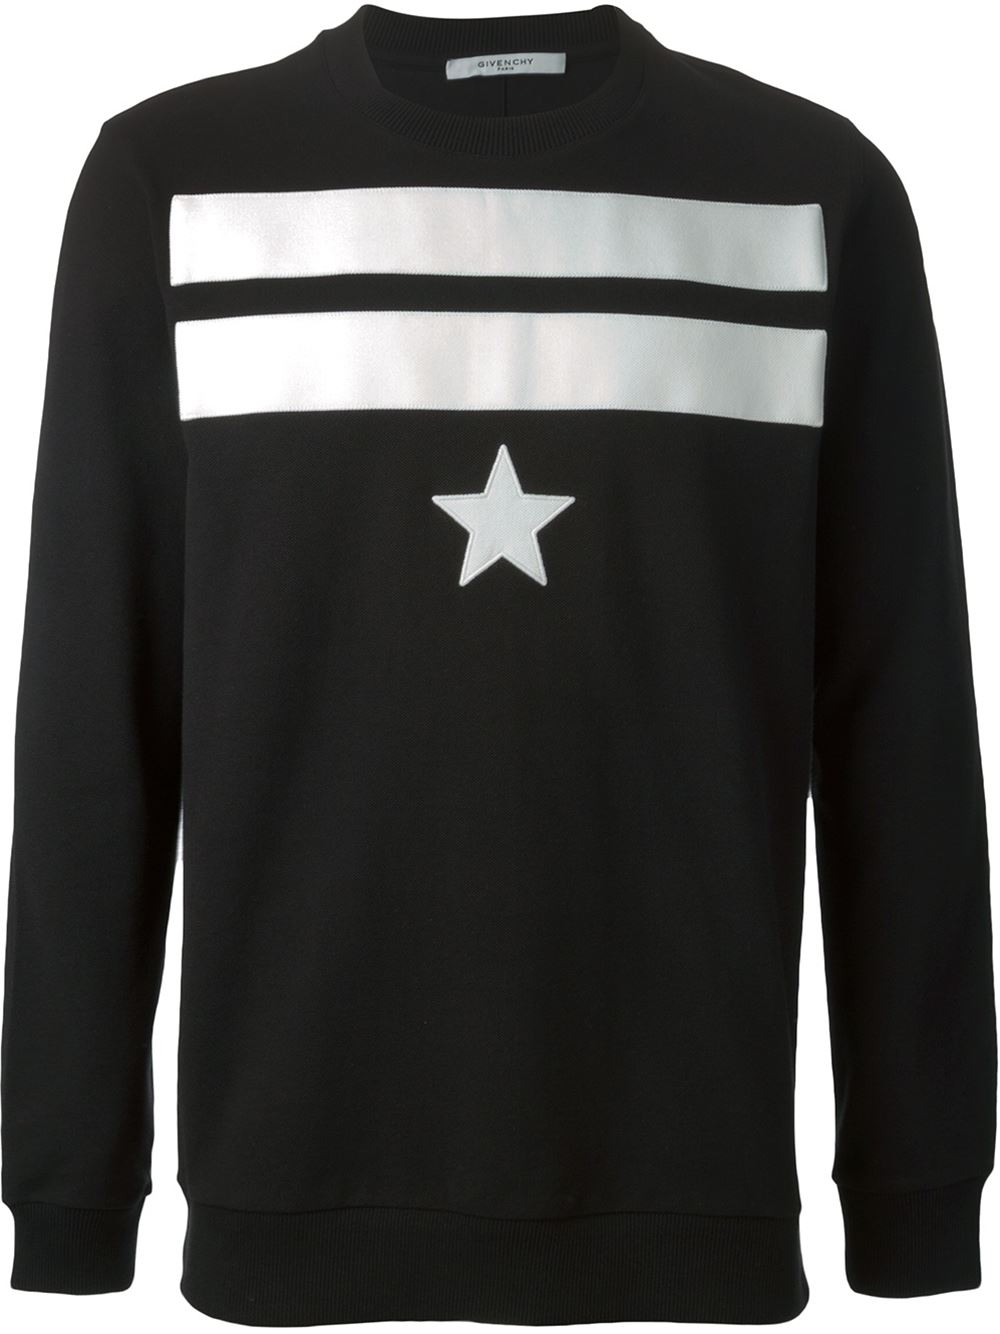 Givenchy Stars And Stripe Print Sweatshirt in Black for Men - Lyst